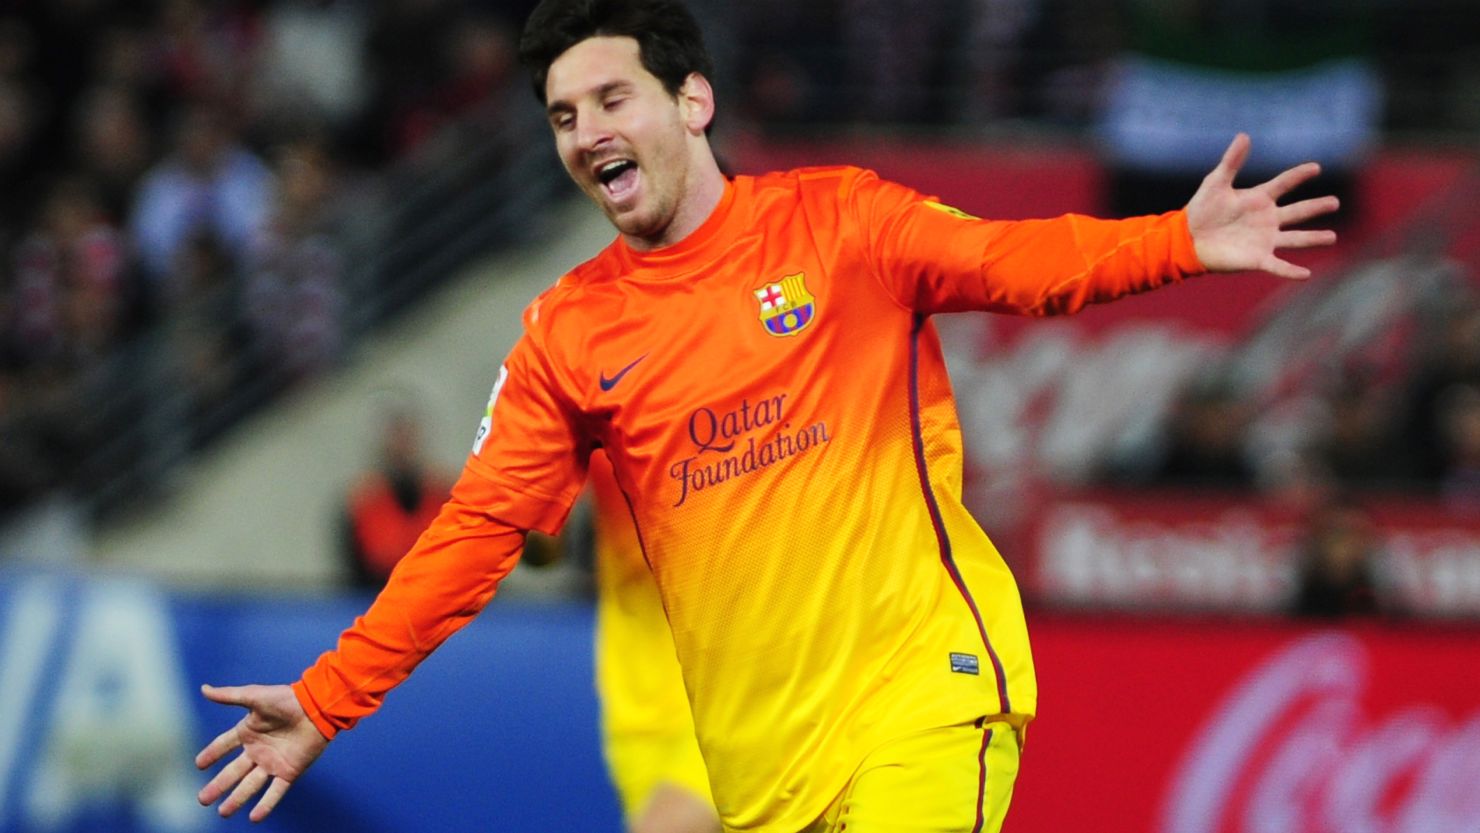 On song, yet again. Lionel Messi scored his 300th goal for Barcelona on Saturday in a 2-1 win over Granada. 